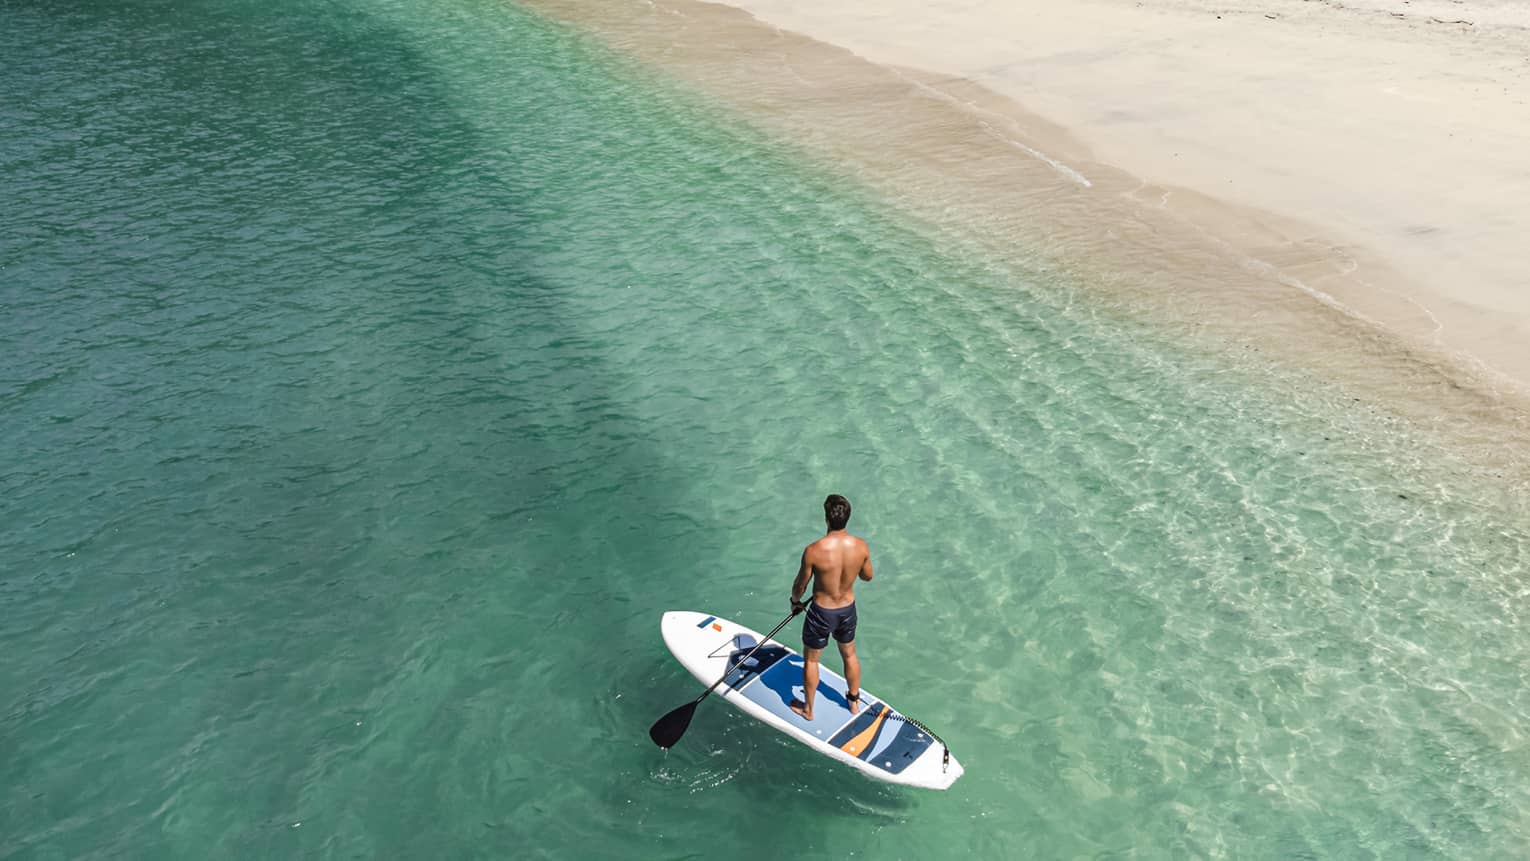 Aerial view of a man riding a stand-up paddleboard close to the shore